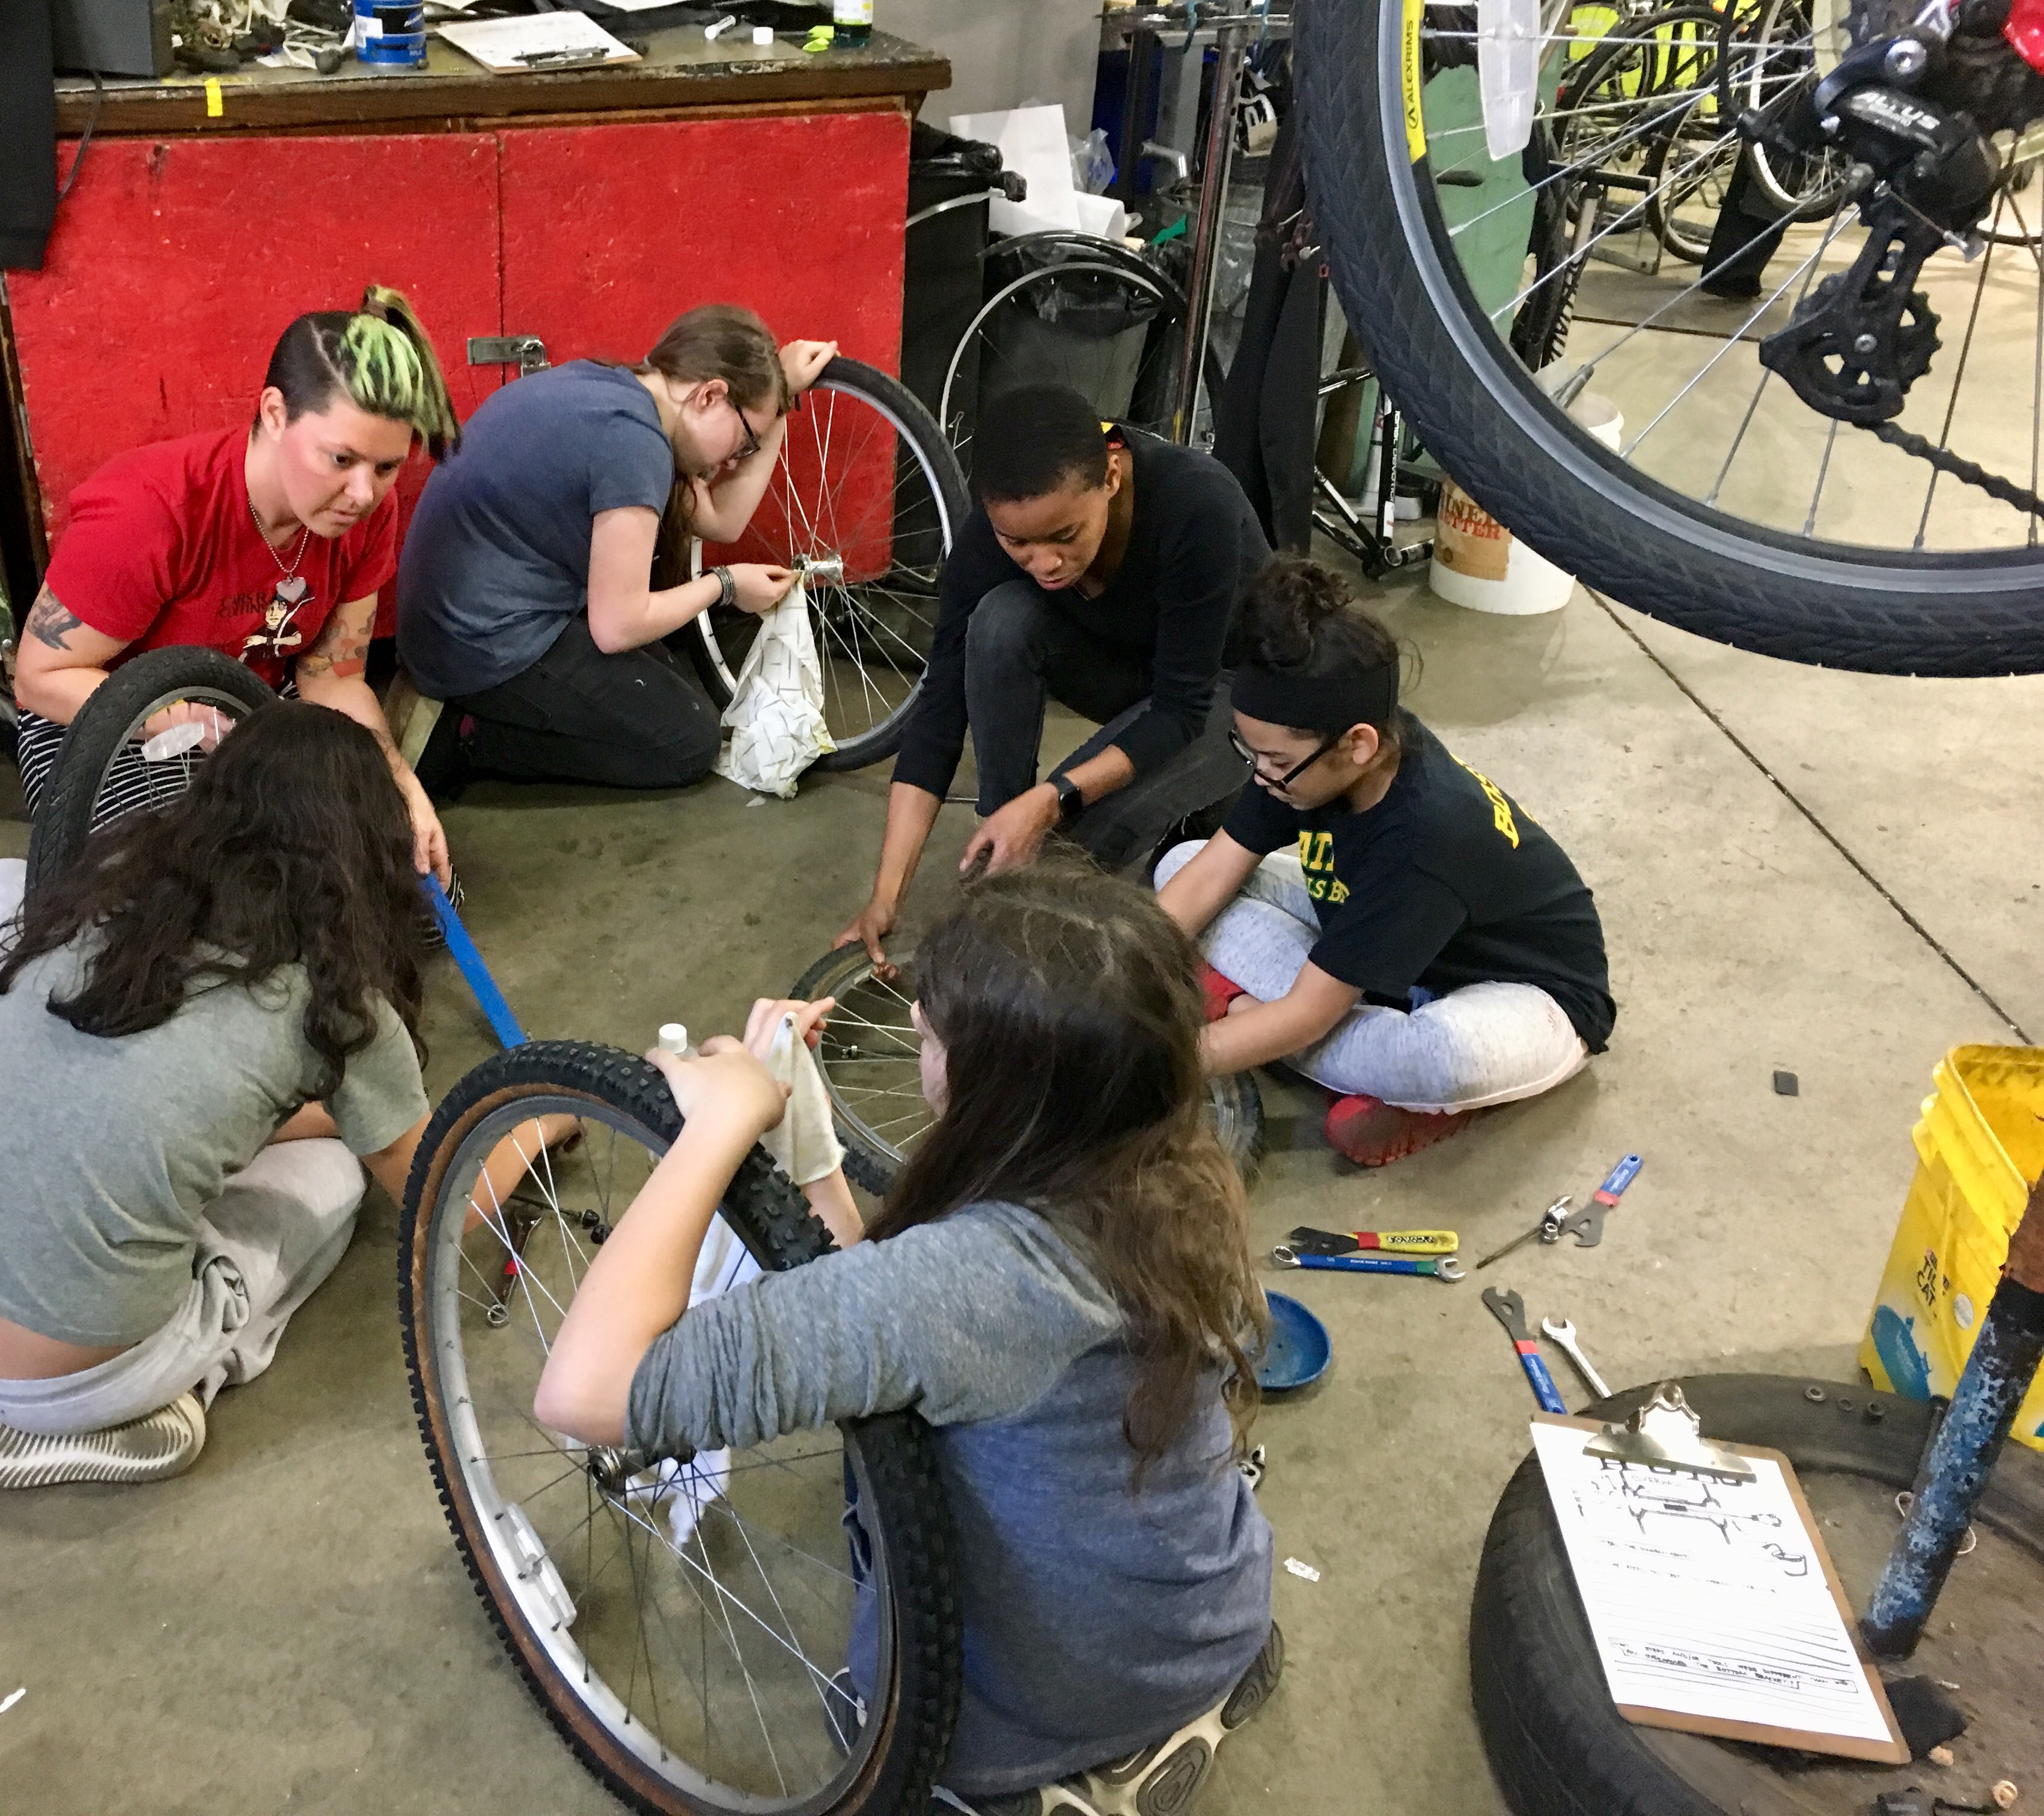 Maddy taking Girls In Action class at Bikes Not Bombs, May 2019